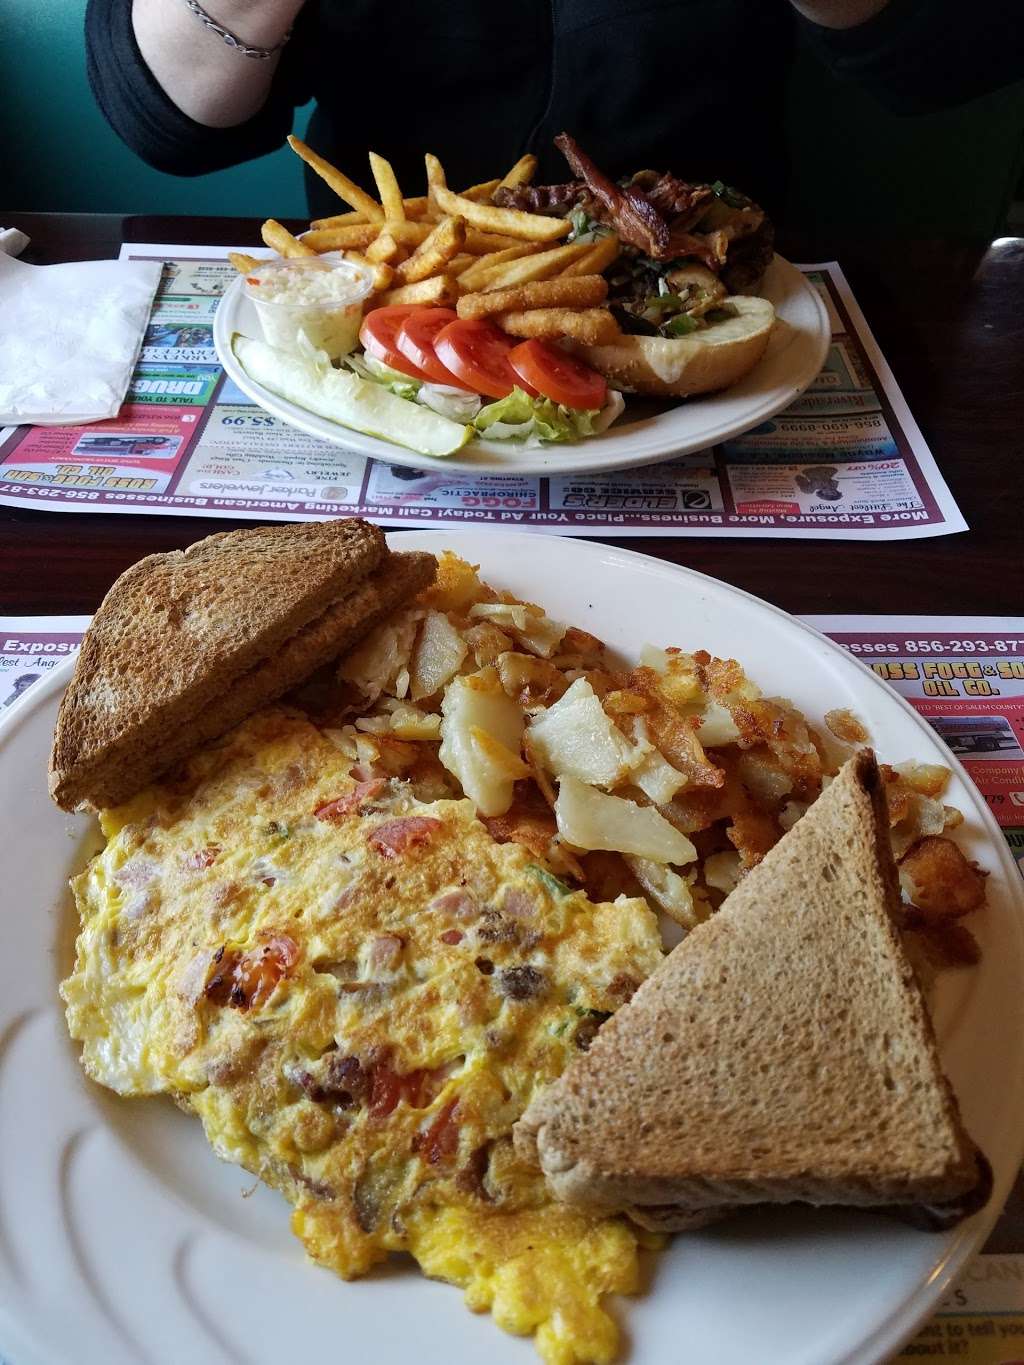 Deepwater Diner | 449 Shell Rd, Carneys Point, NJ 08069 | Phone: (856) 299-1411